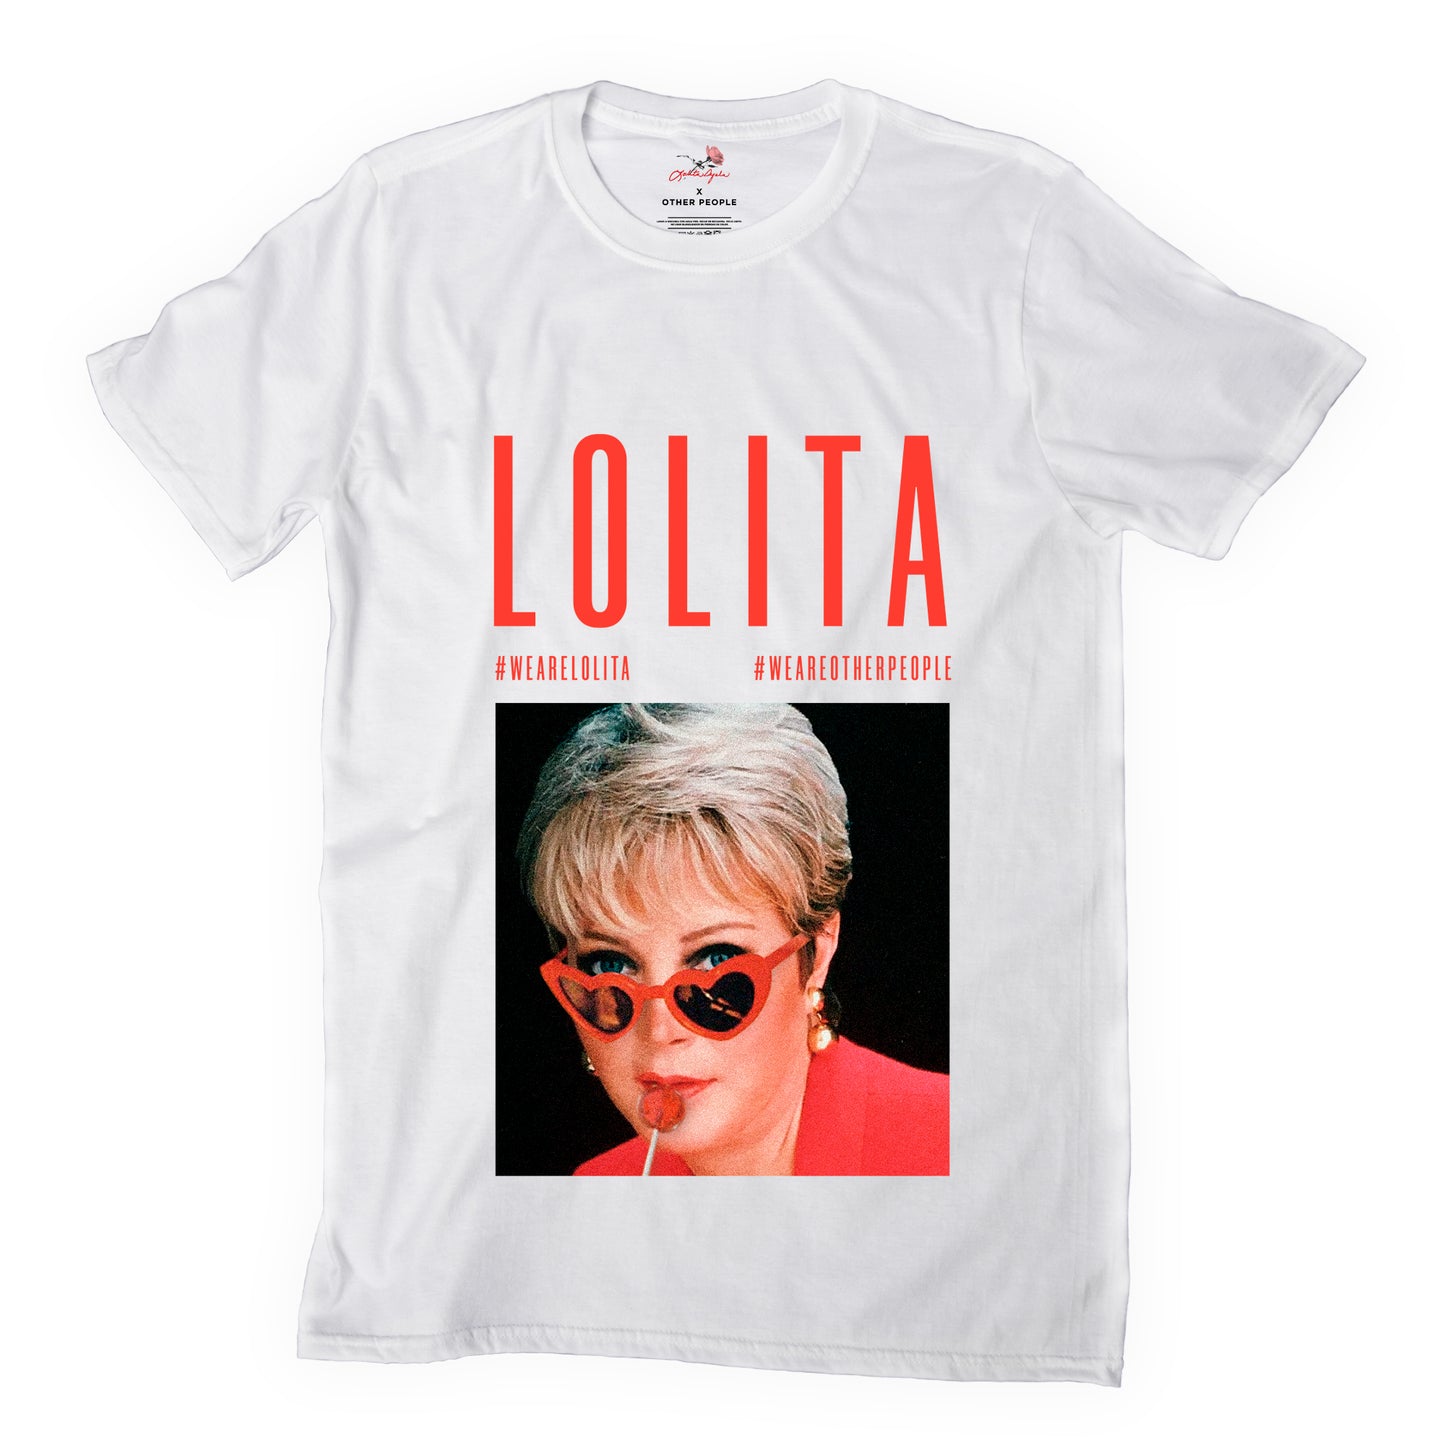 Lolita x Other People